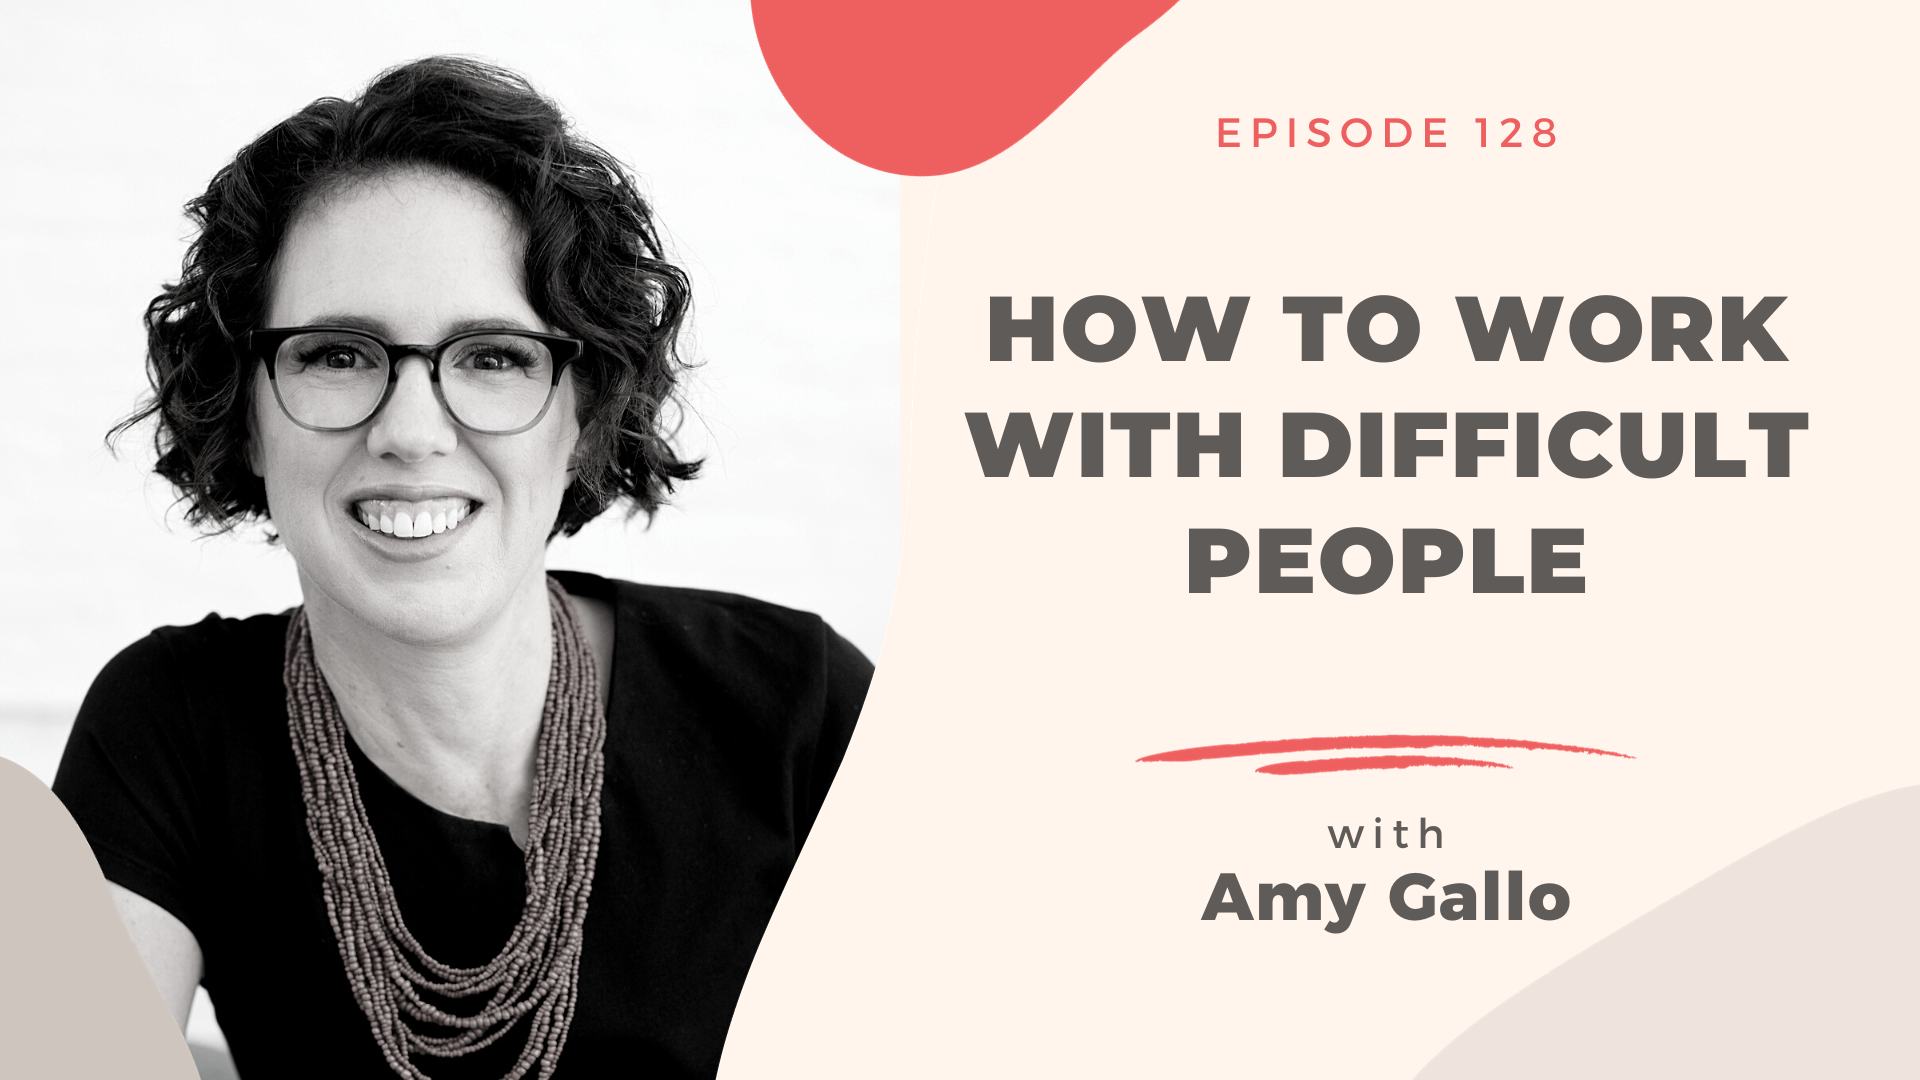 Amy Gallo at the CultureLab Podcast